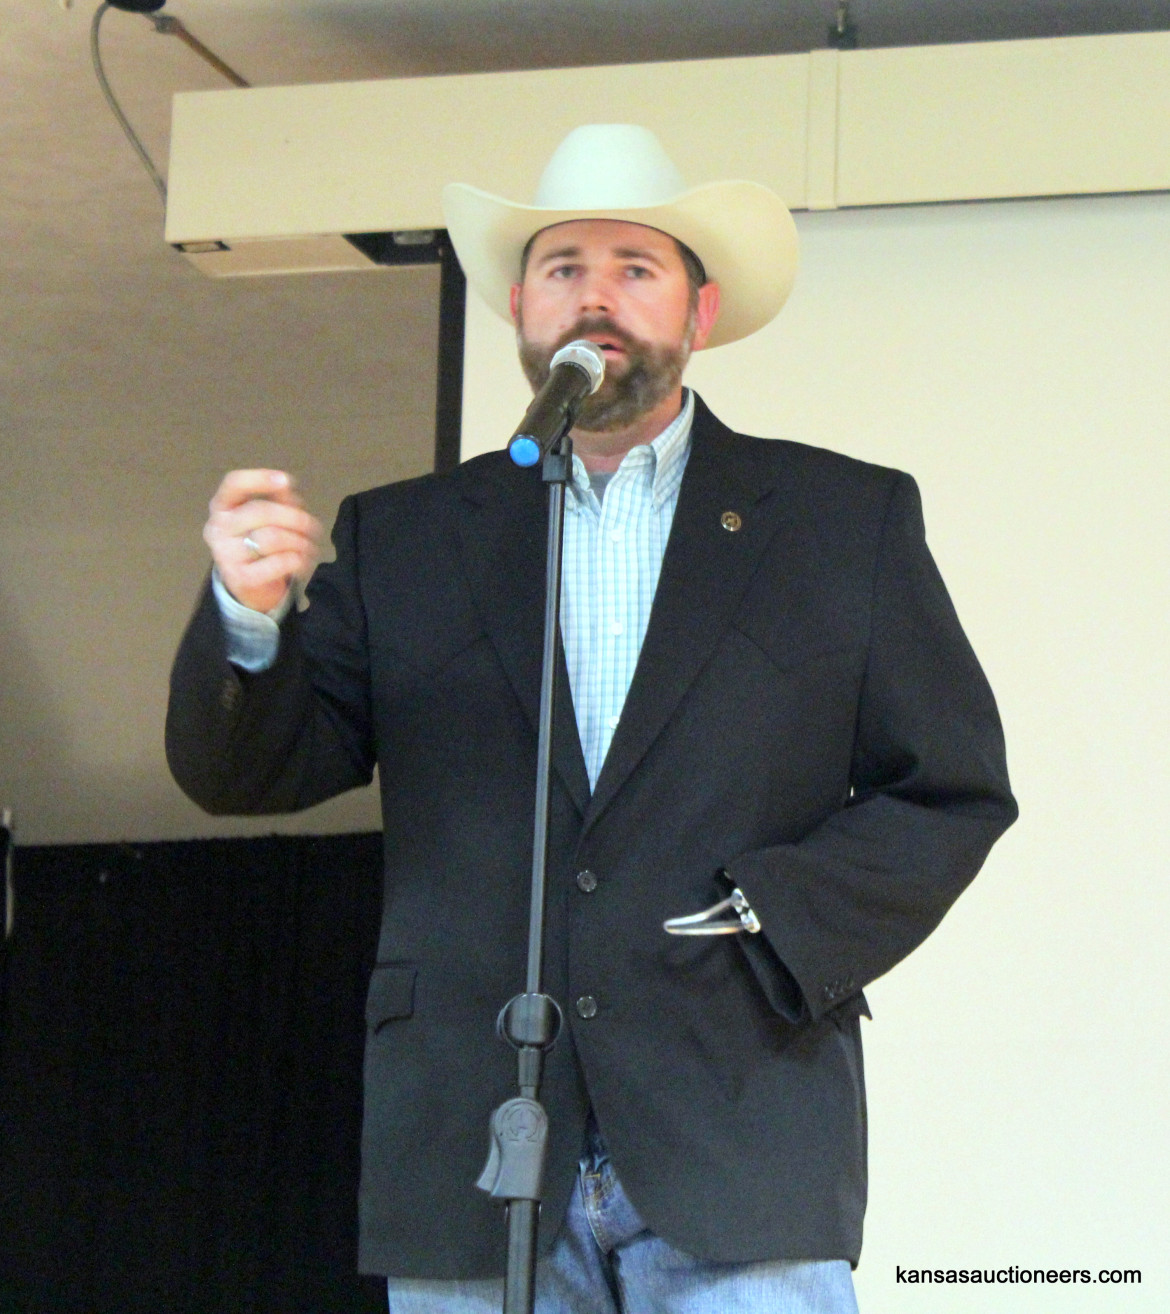 Ross Daniels competing in the 2016 Kansas Auctioneer Preliminaries.